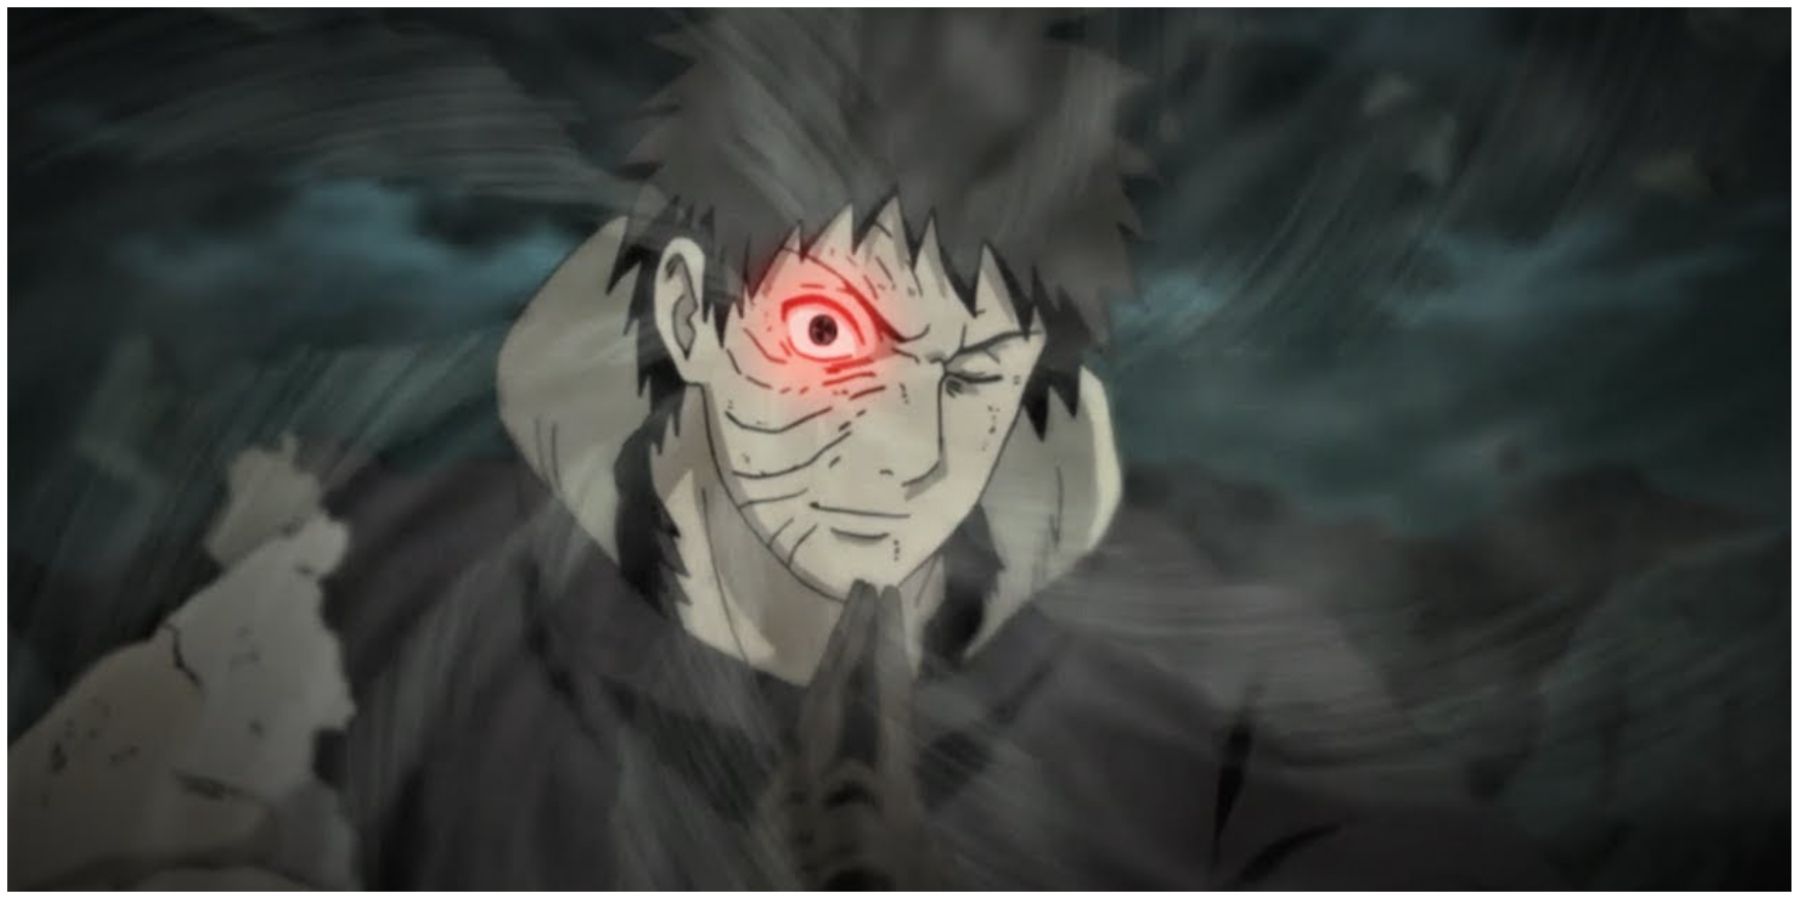 Obito uses Kamui to enter his special dimension